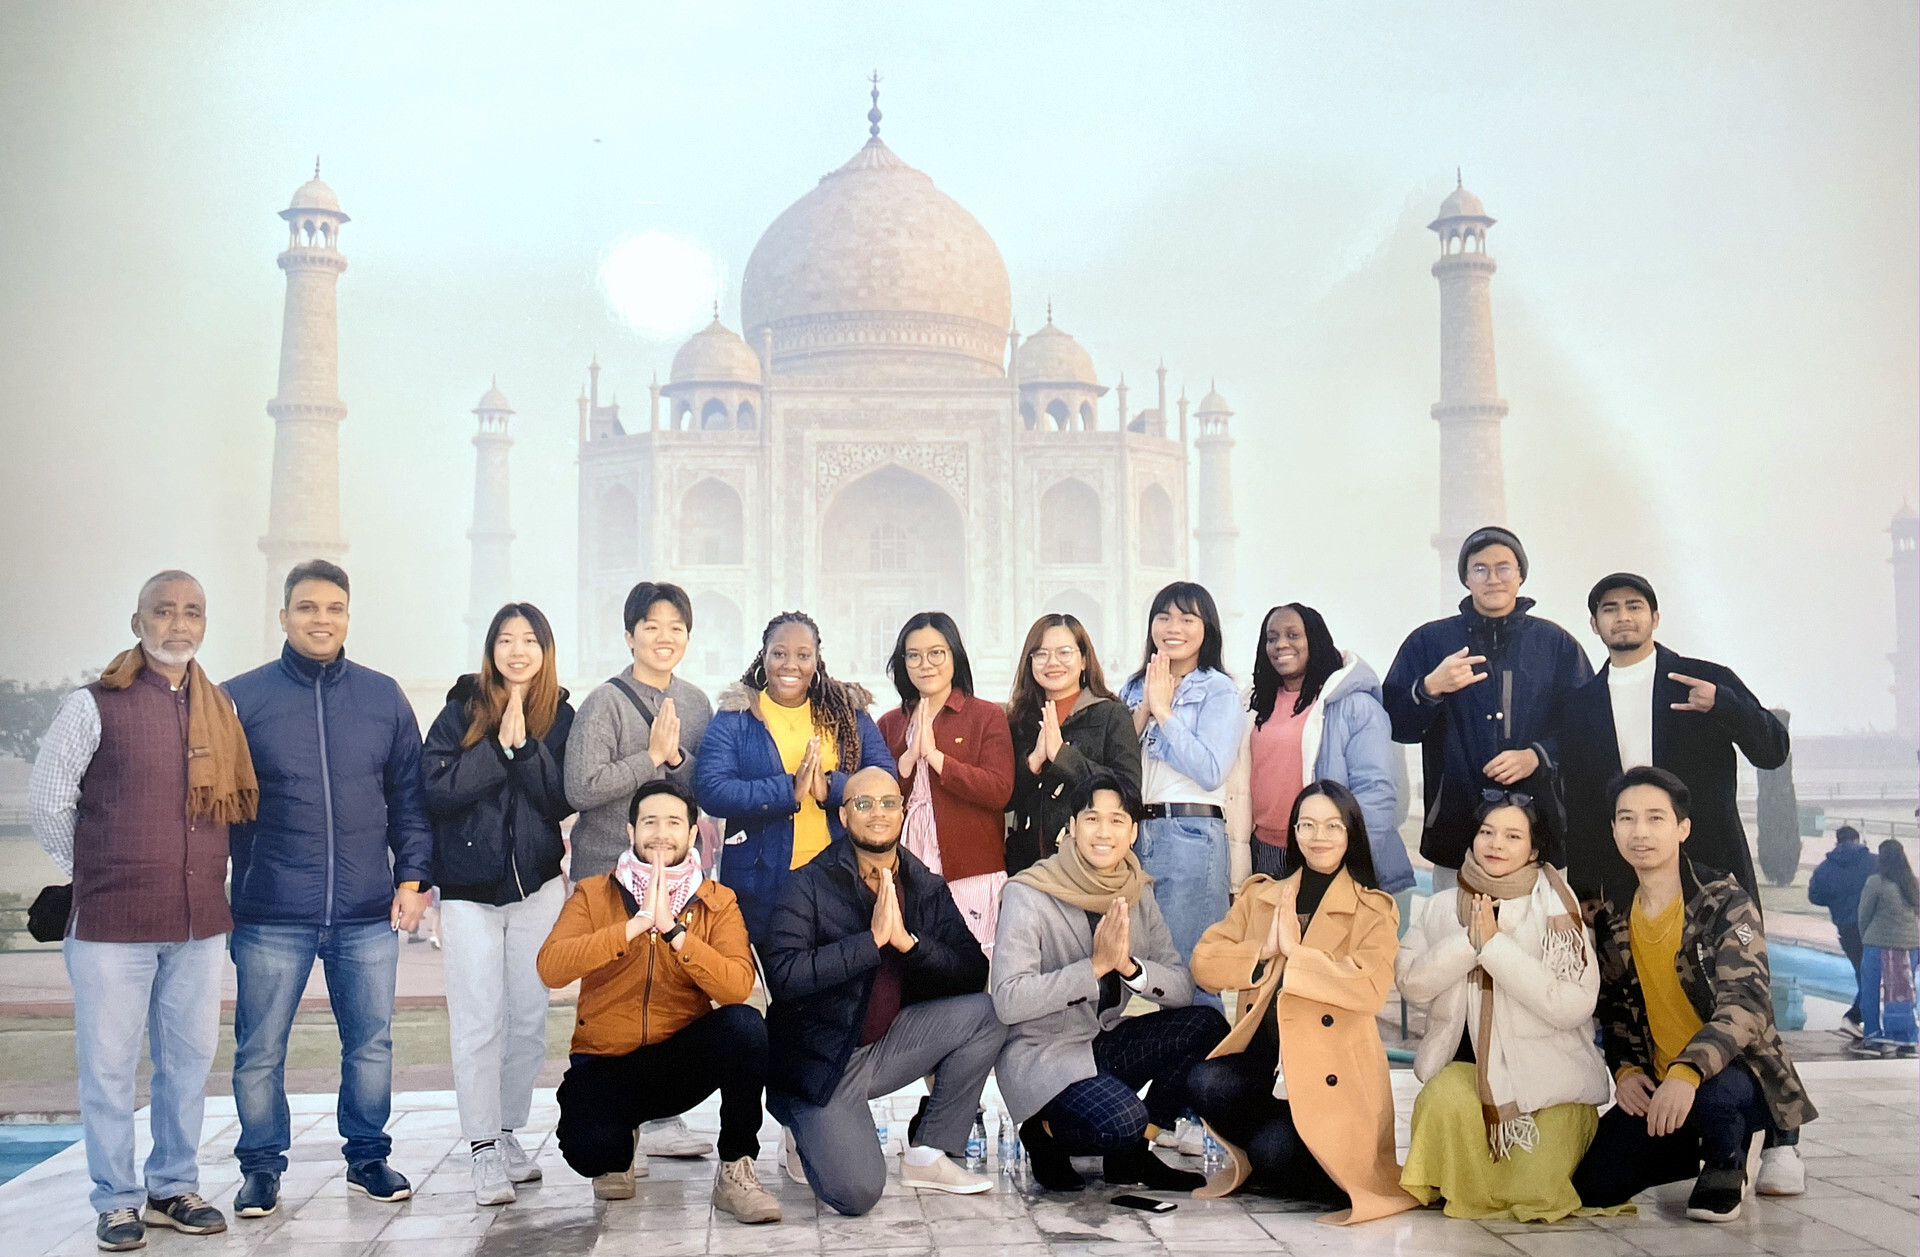 From the left - Group photo; of local Indian firm representative Sarfaraz, Shadab Mohammad Khalil（right）, Associate Professor of Dept. of IB, National Dong Hwa University, and the overseas visiting students in front of Taj Mahal.